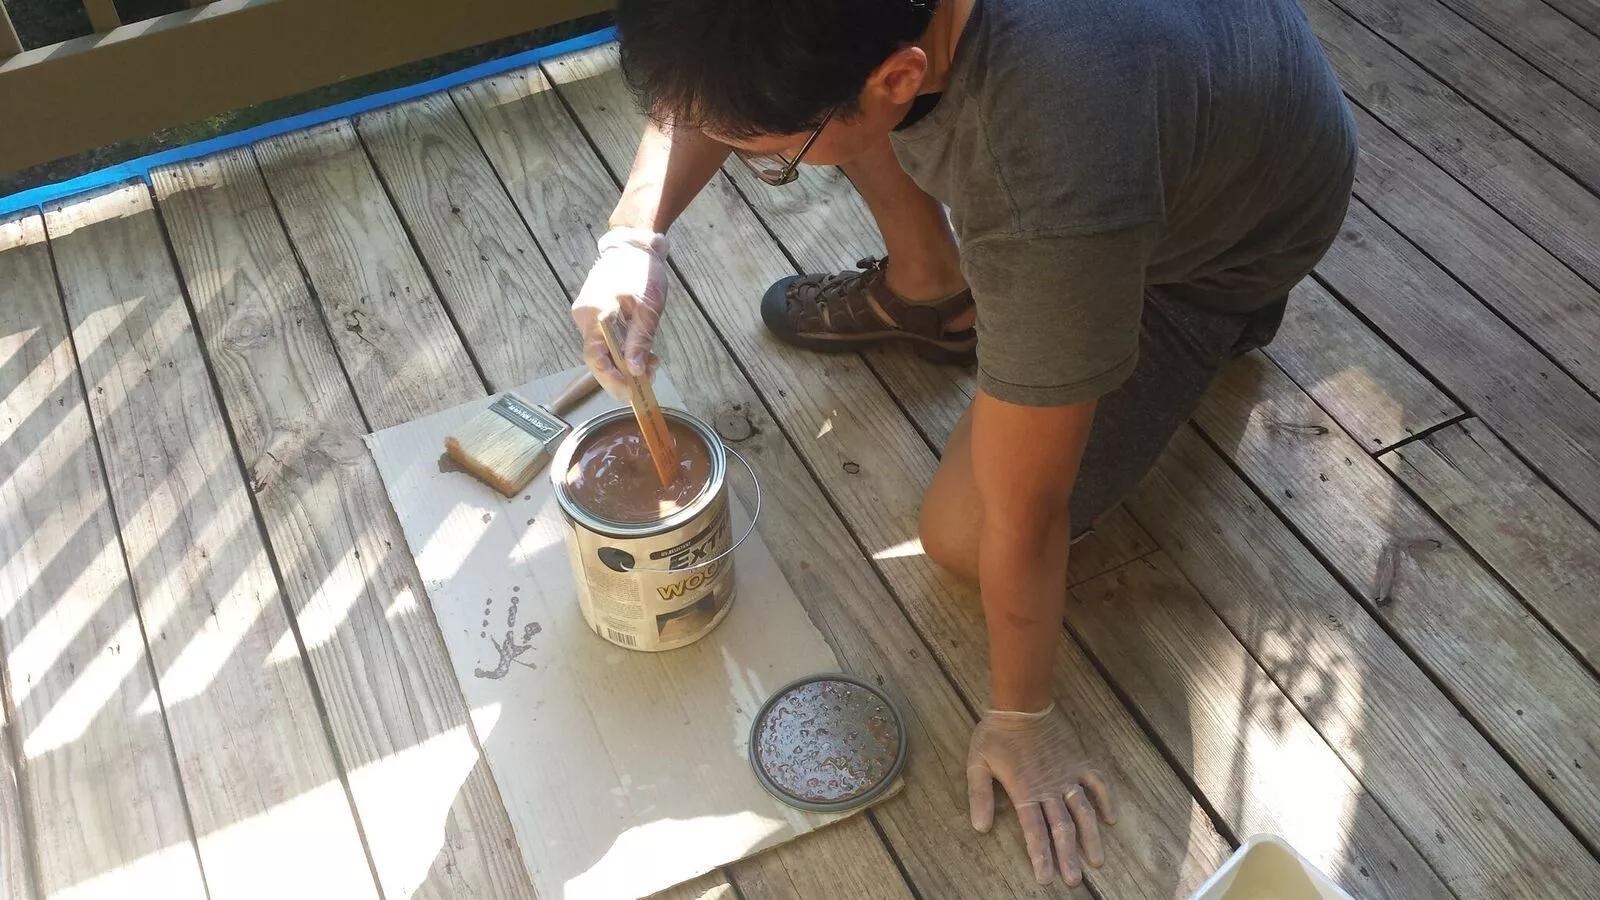 Mixing your wood stain with a stir stick.